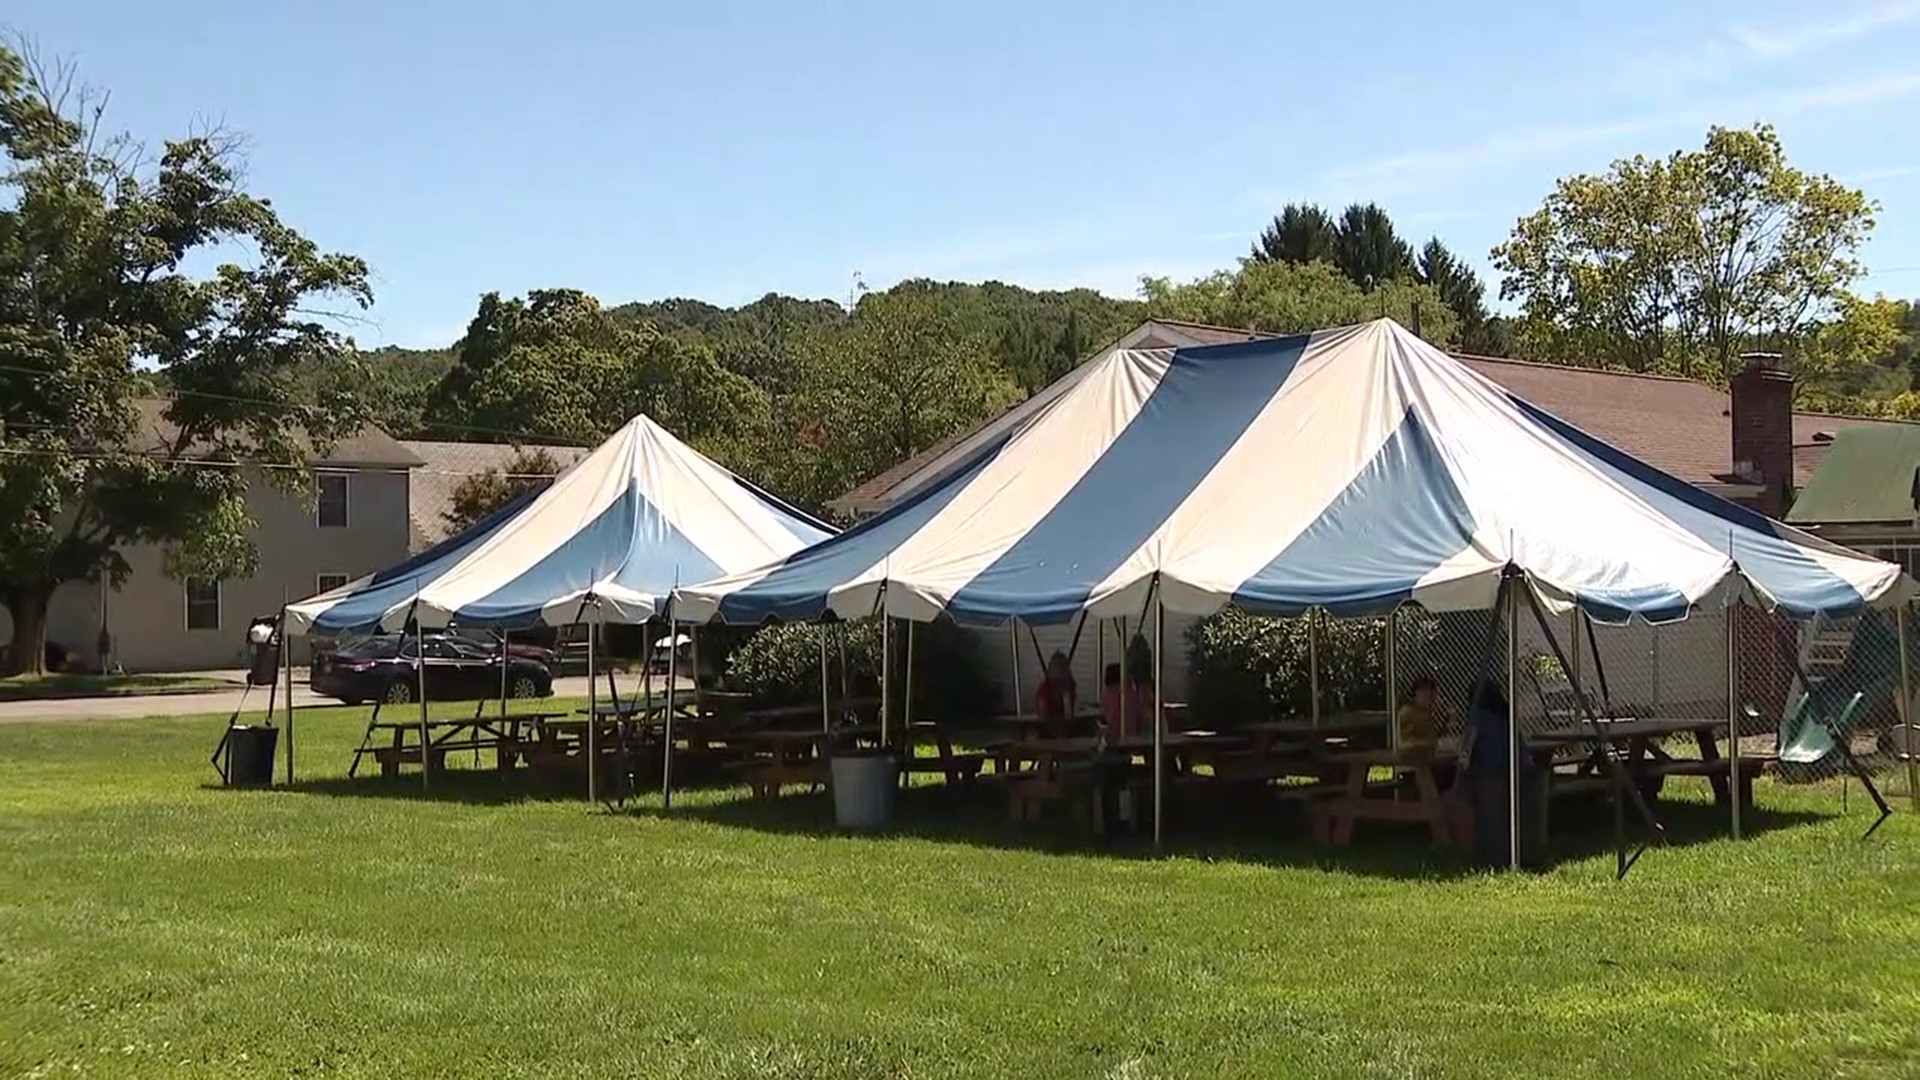 The annual food festival at Holy Cross Greek Orthodox Church in Stroudsburg looks a bit different this year due to COVID-19.